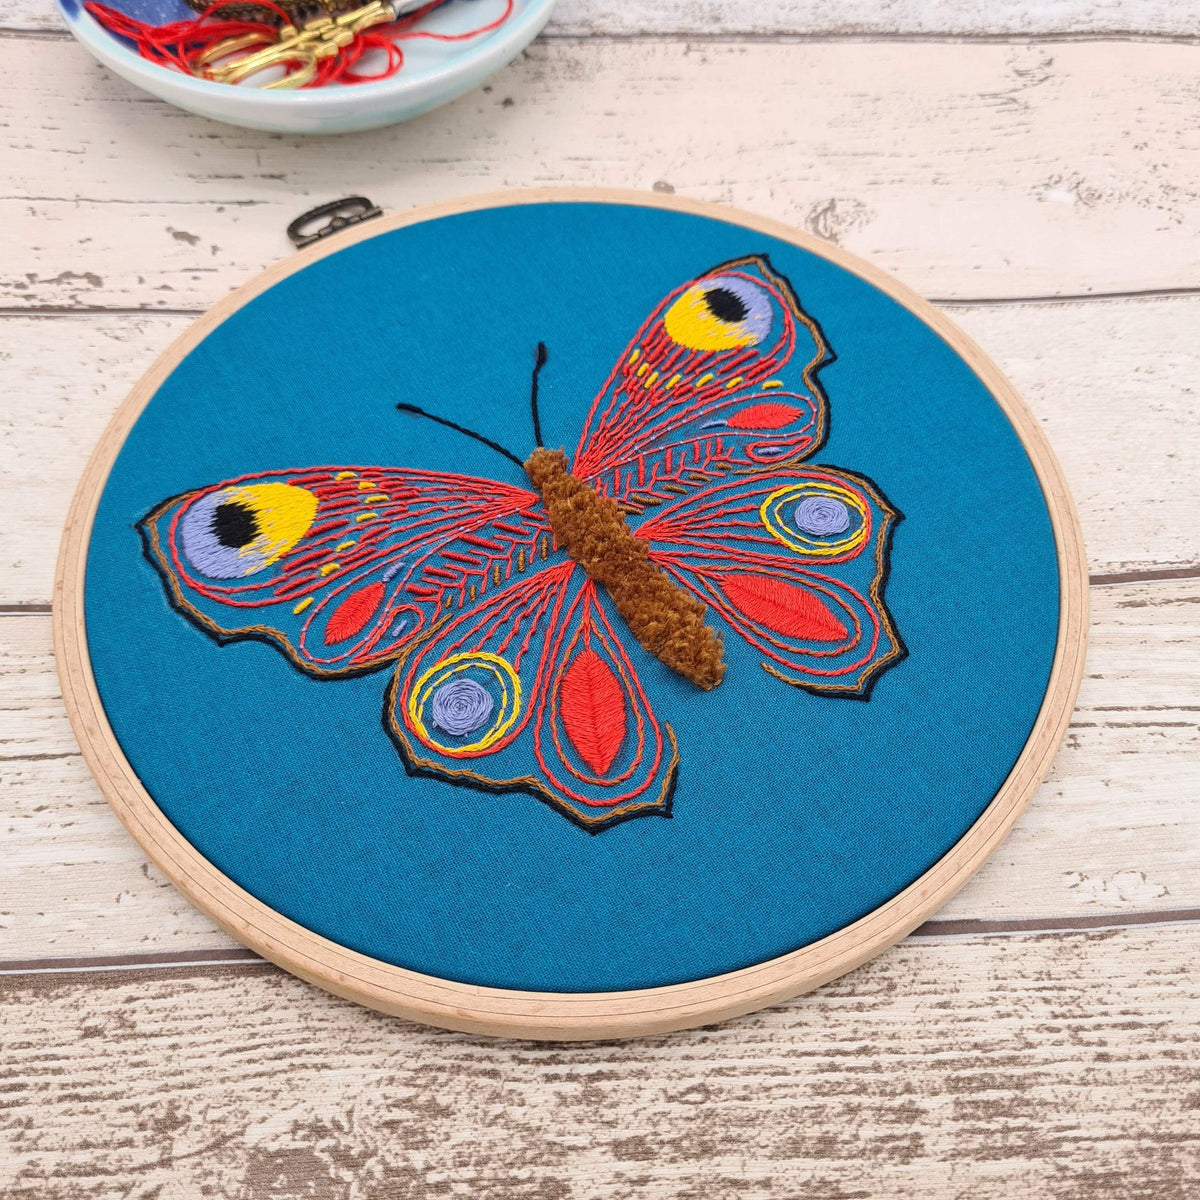 Paraffle Embroidery Pattern Butterfly Embroidery Pattern